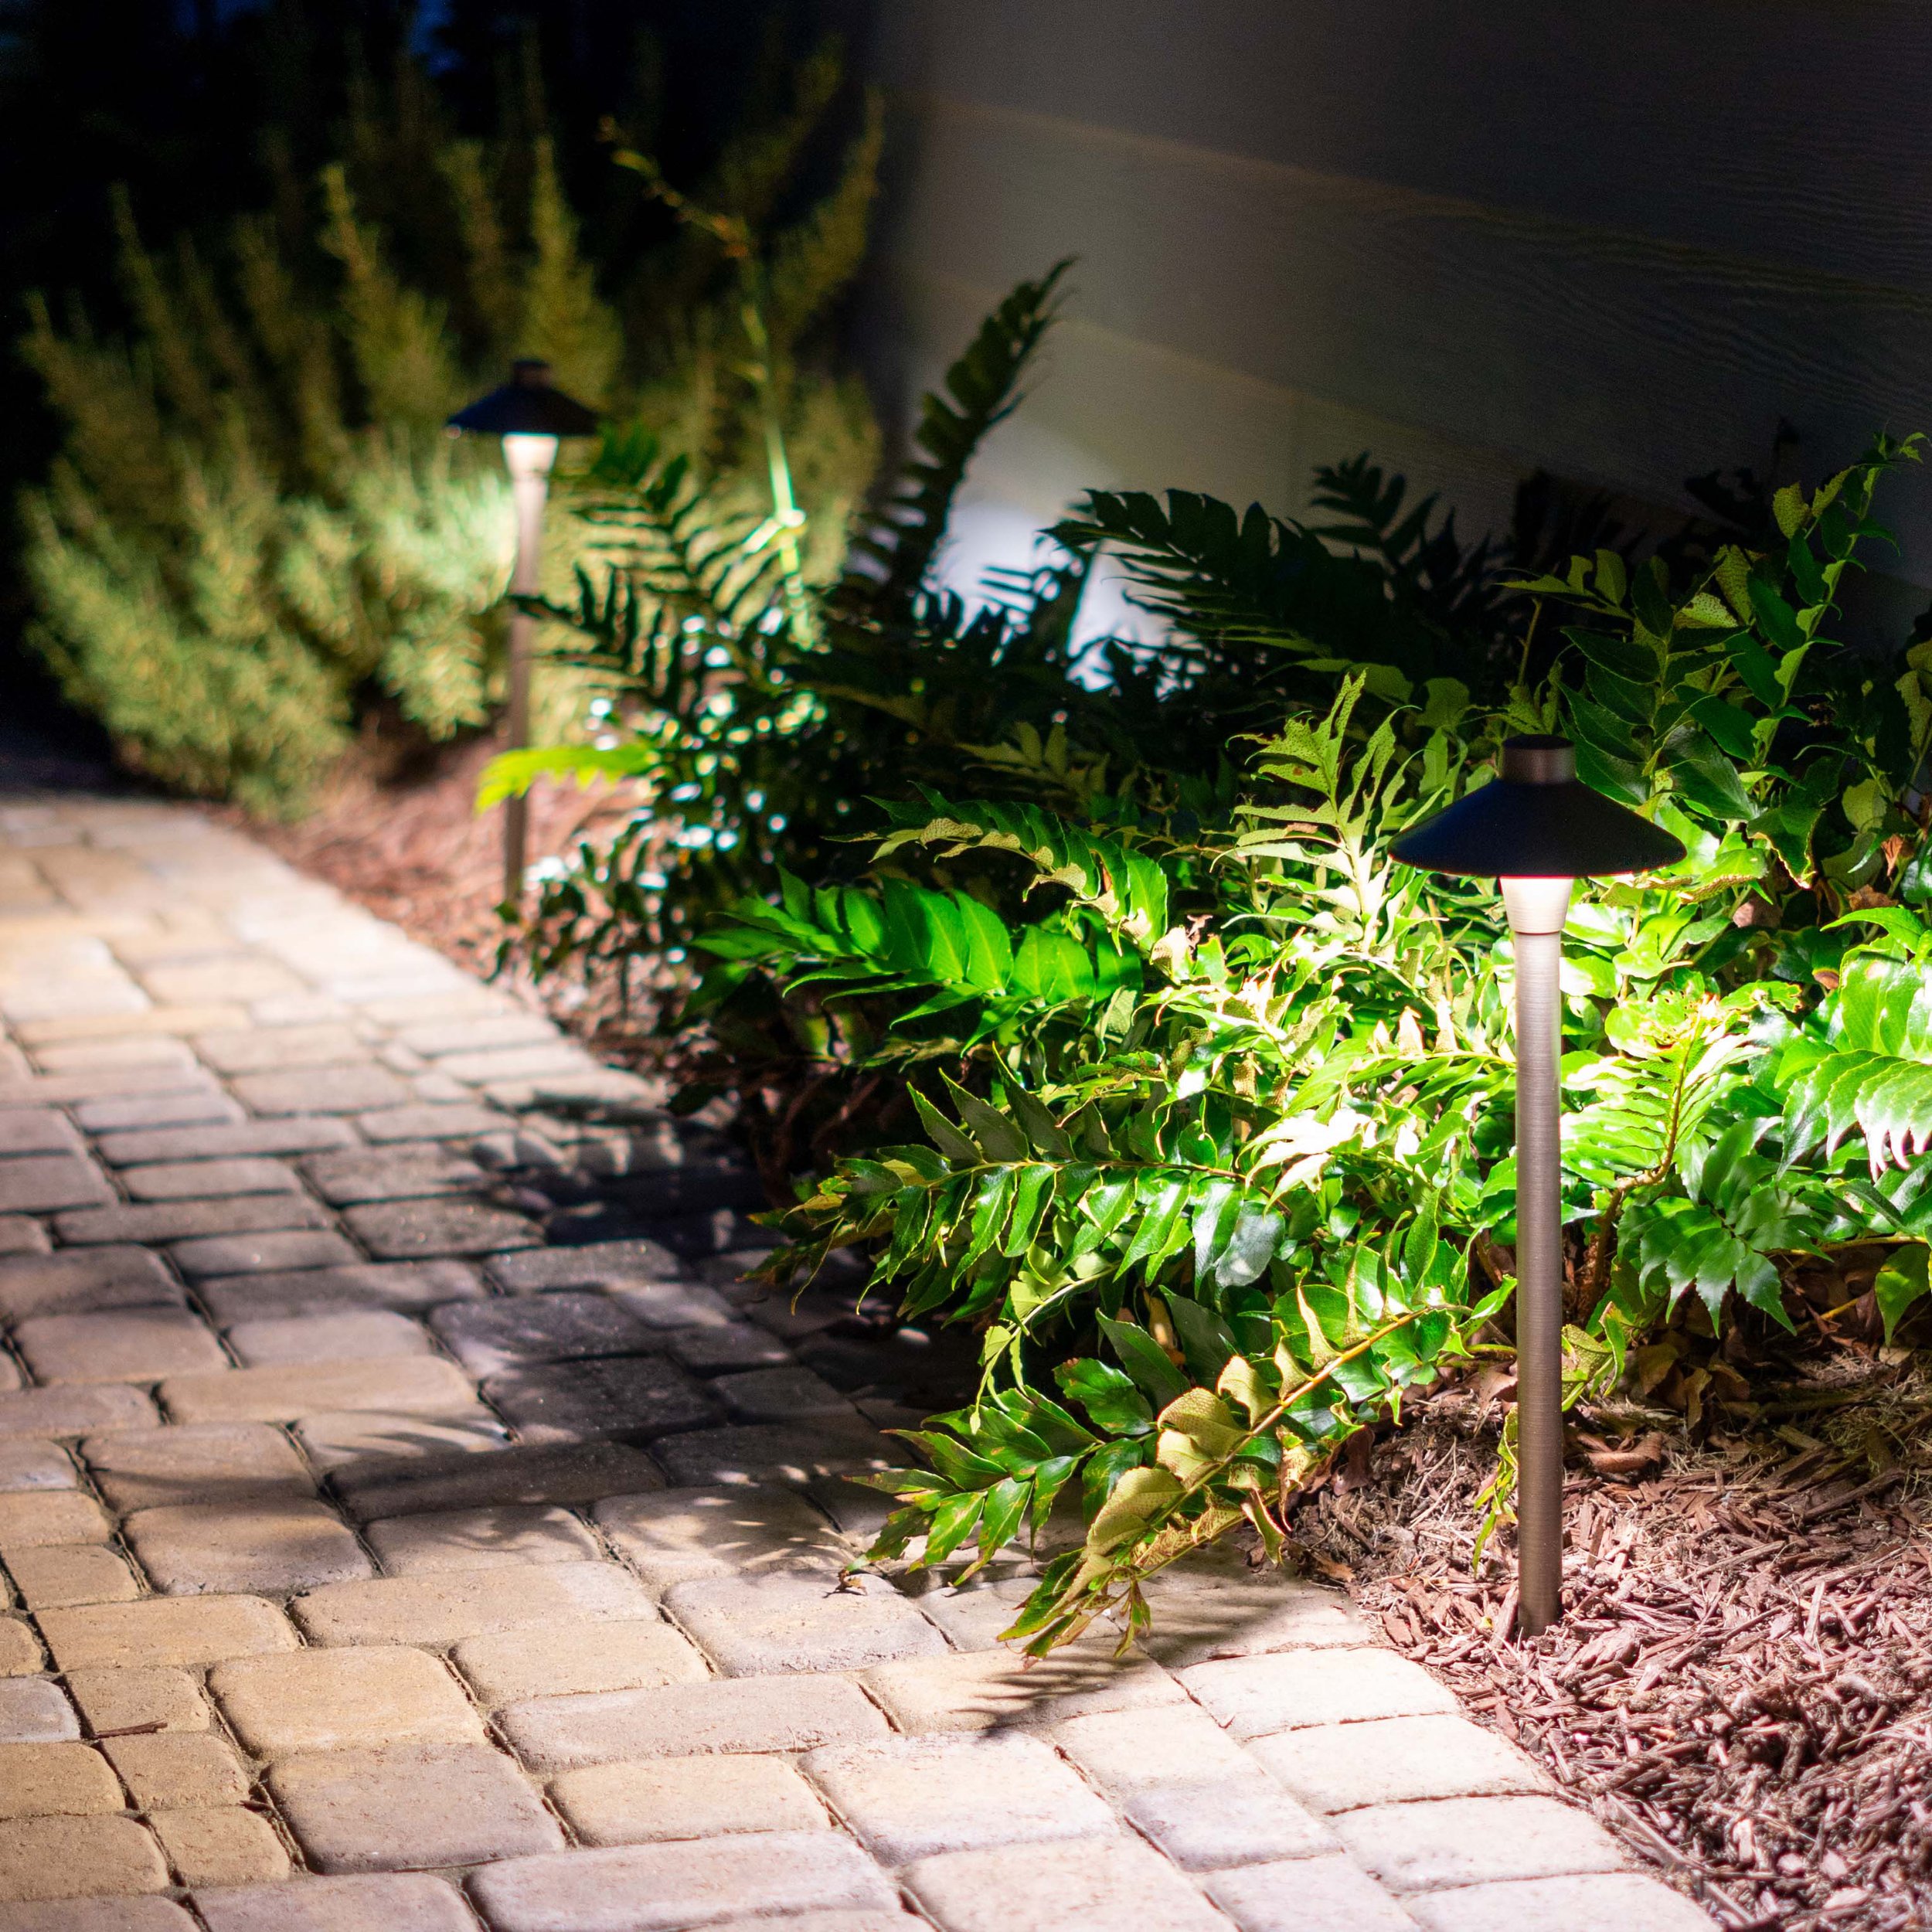  Two traditional path lights illuminate a stamped concrete path alongside a landscaping bed with ferns surrounded by mulch. 